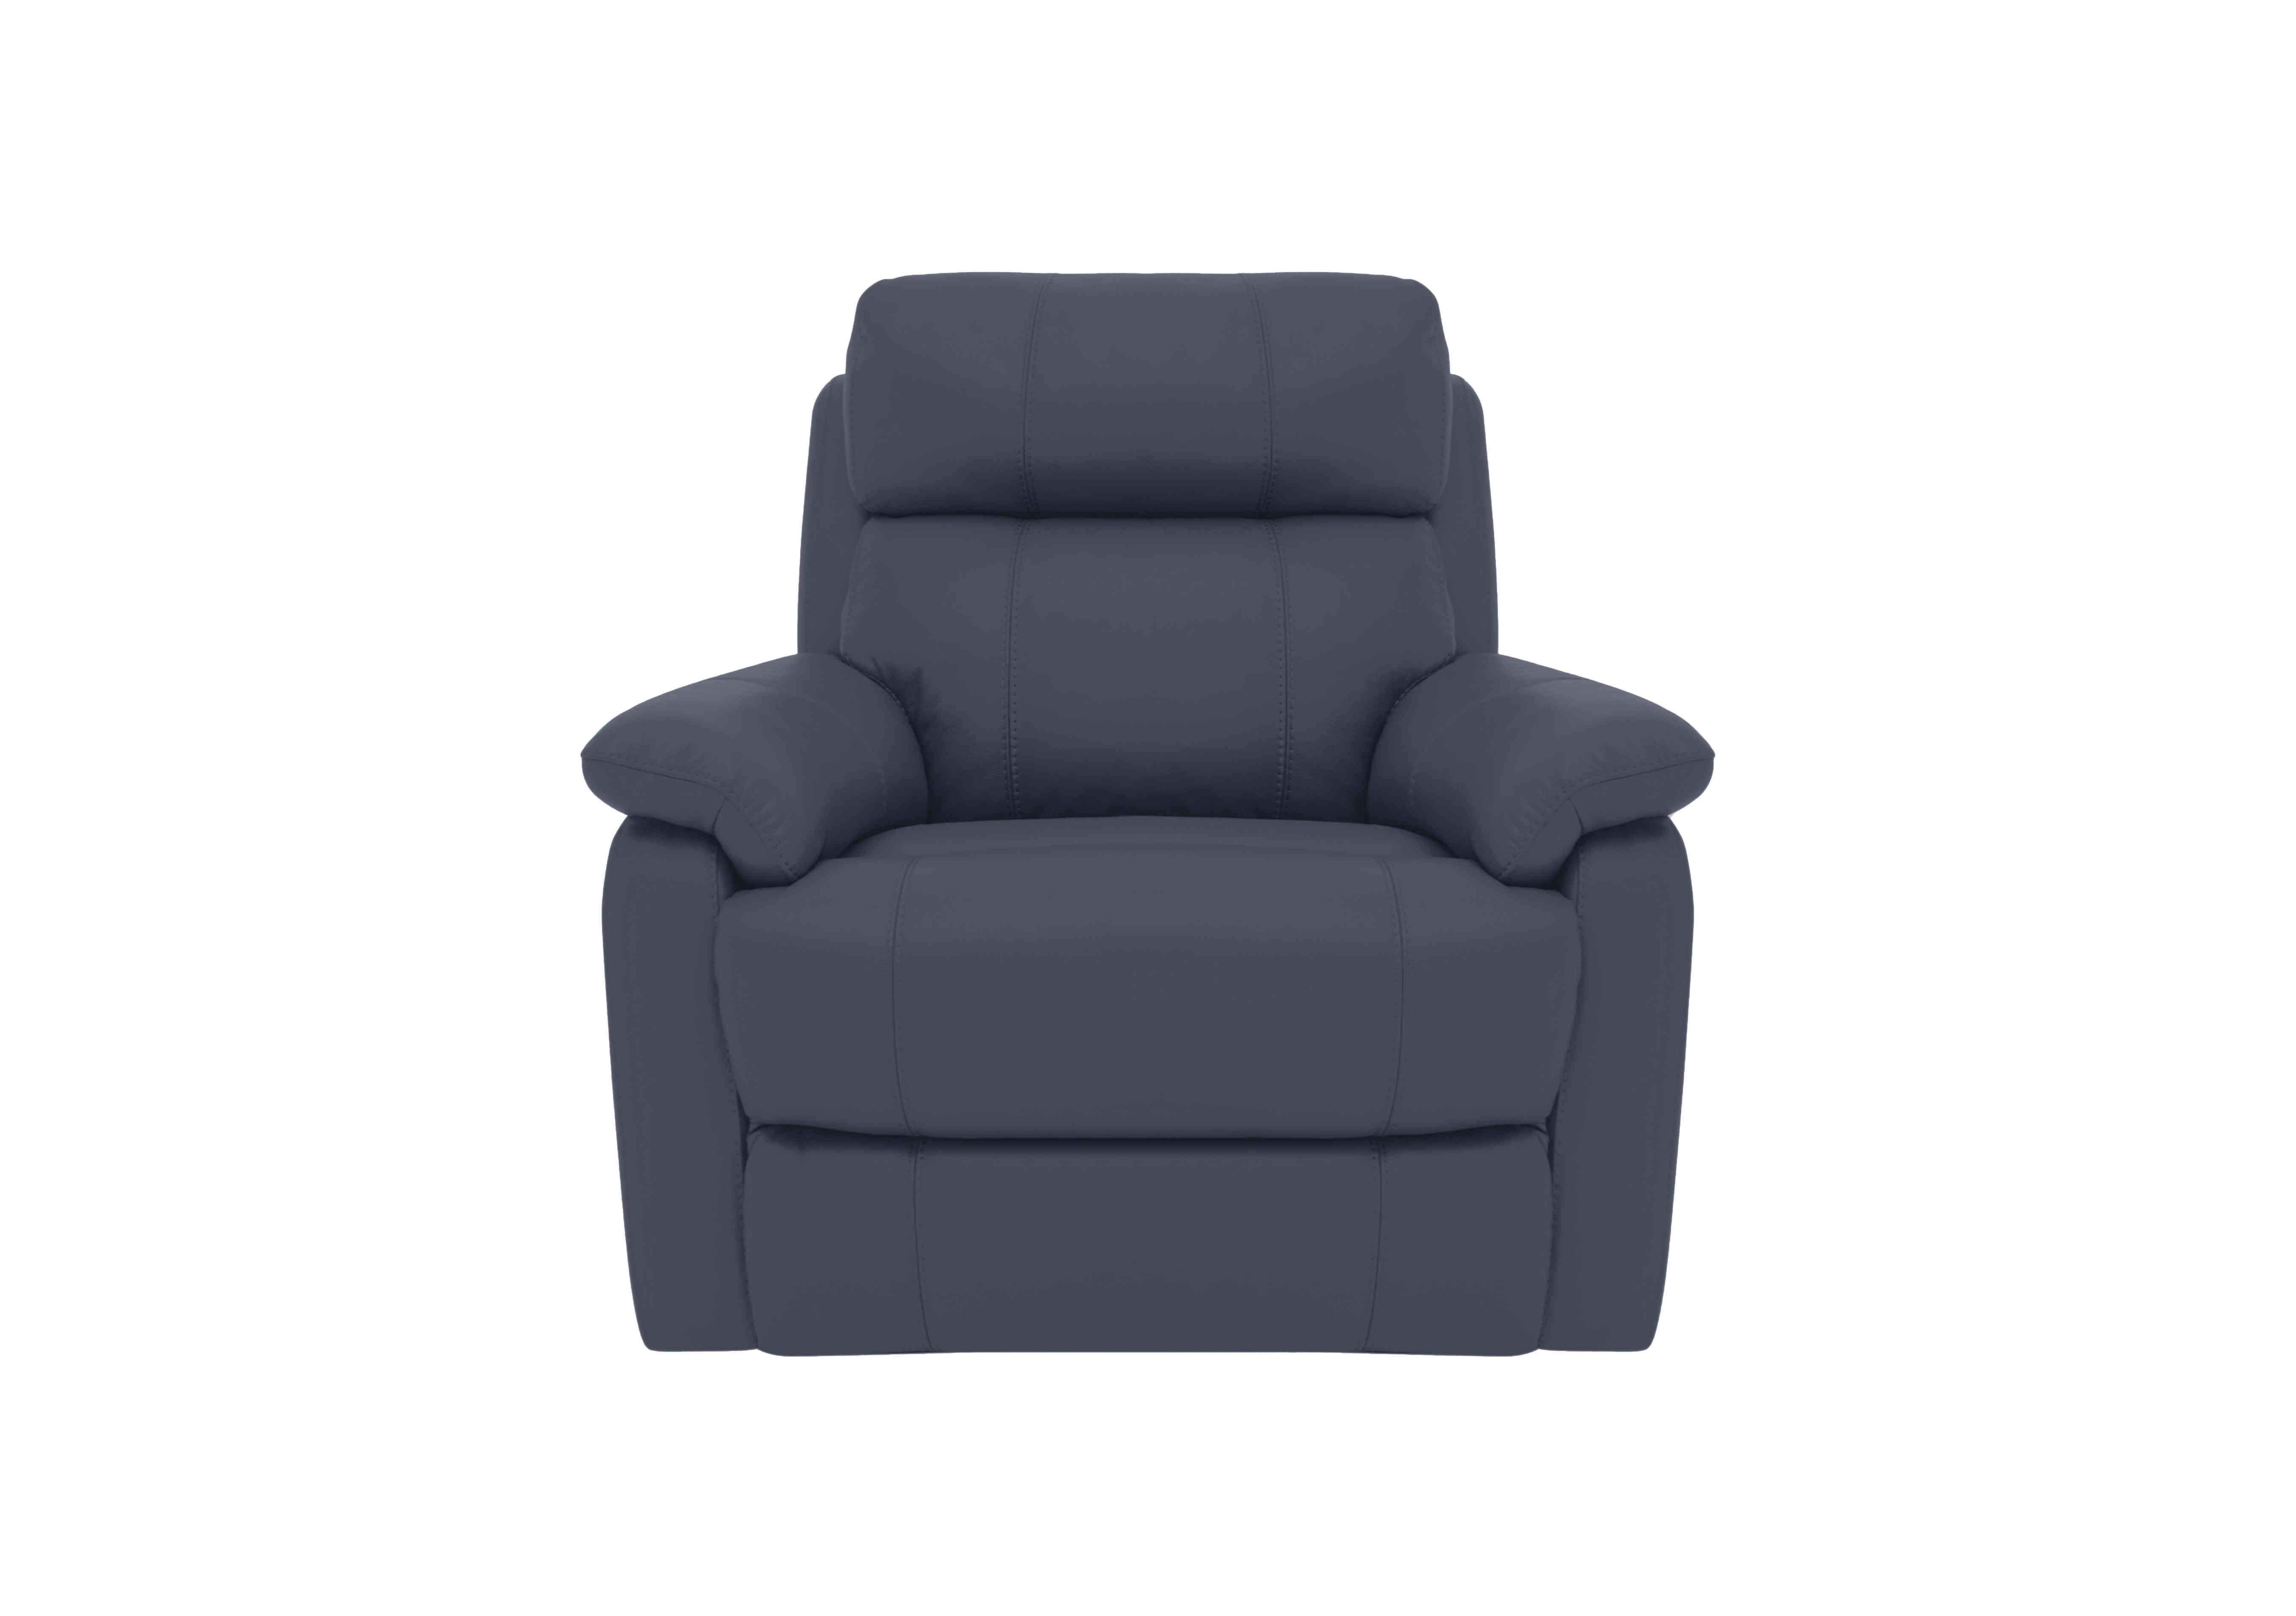 Relax Station Komodo Leather Armchair in Bv-313e Ocean Blue on Furniture Village